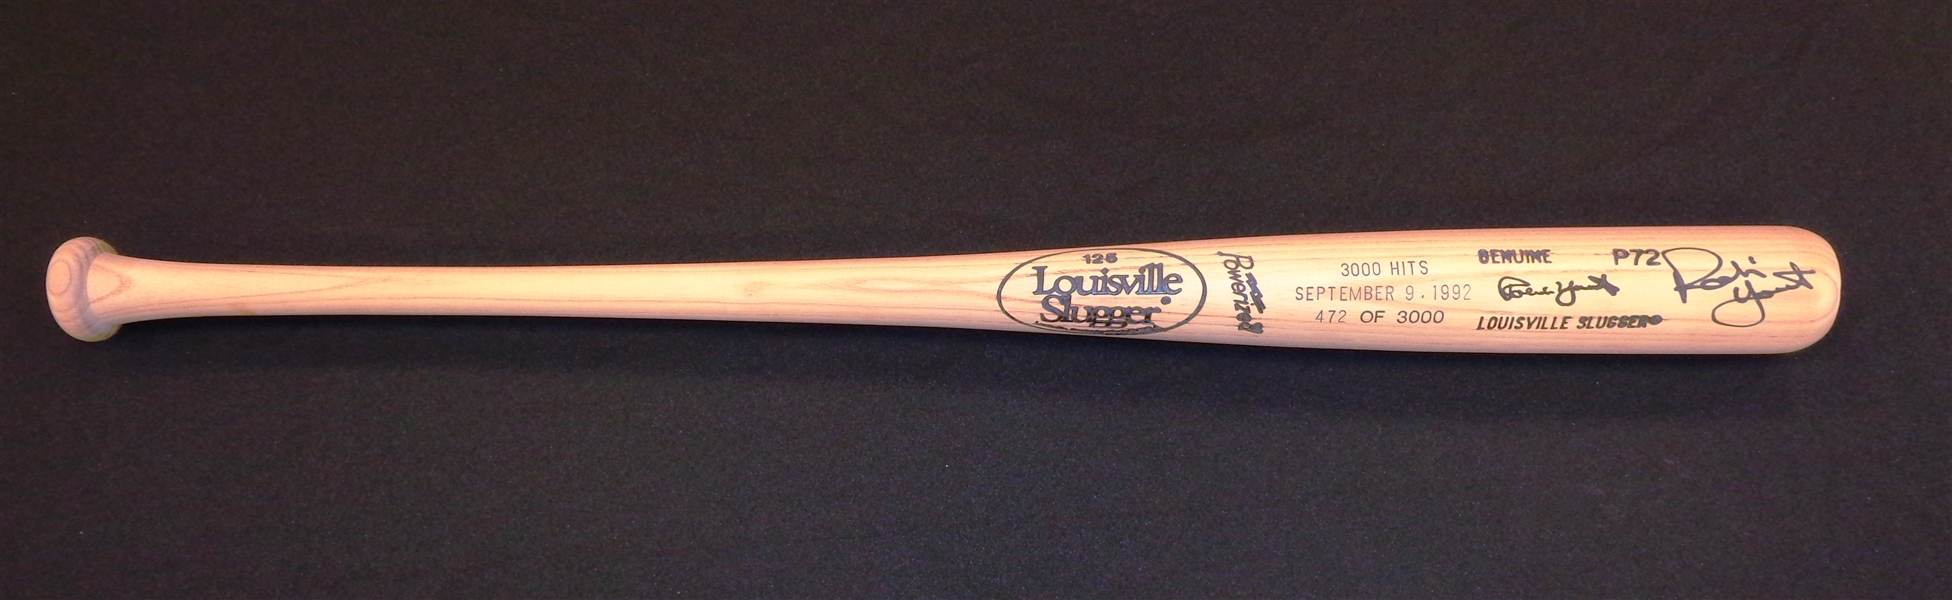 Robin Yount Autographed Game Model Bat 3000 Hits Edition